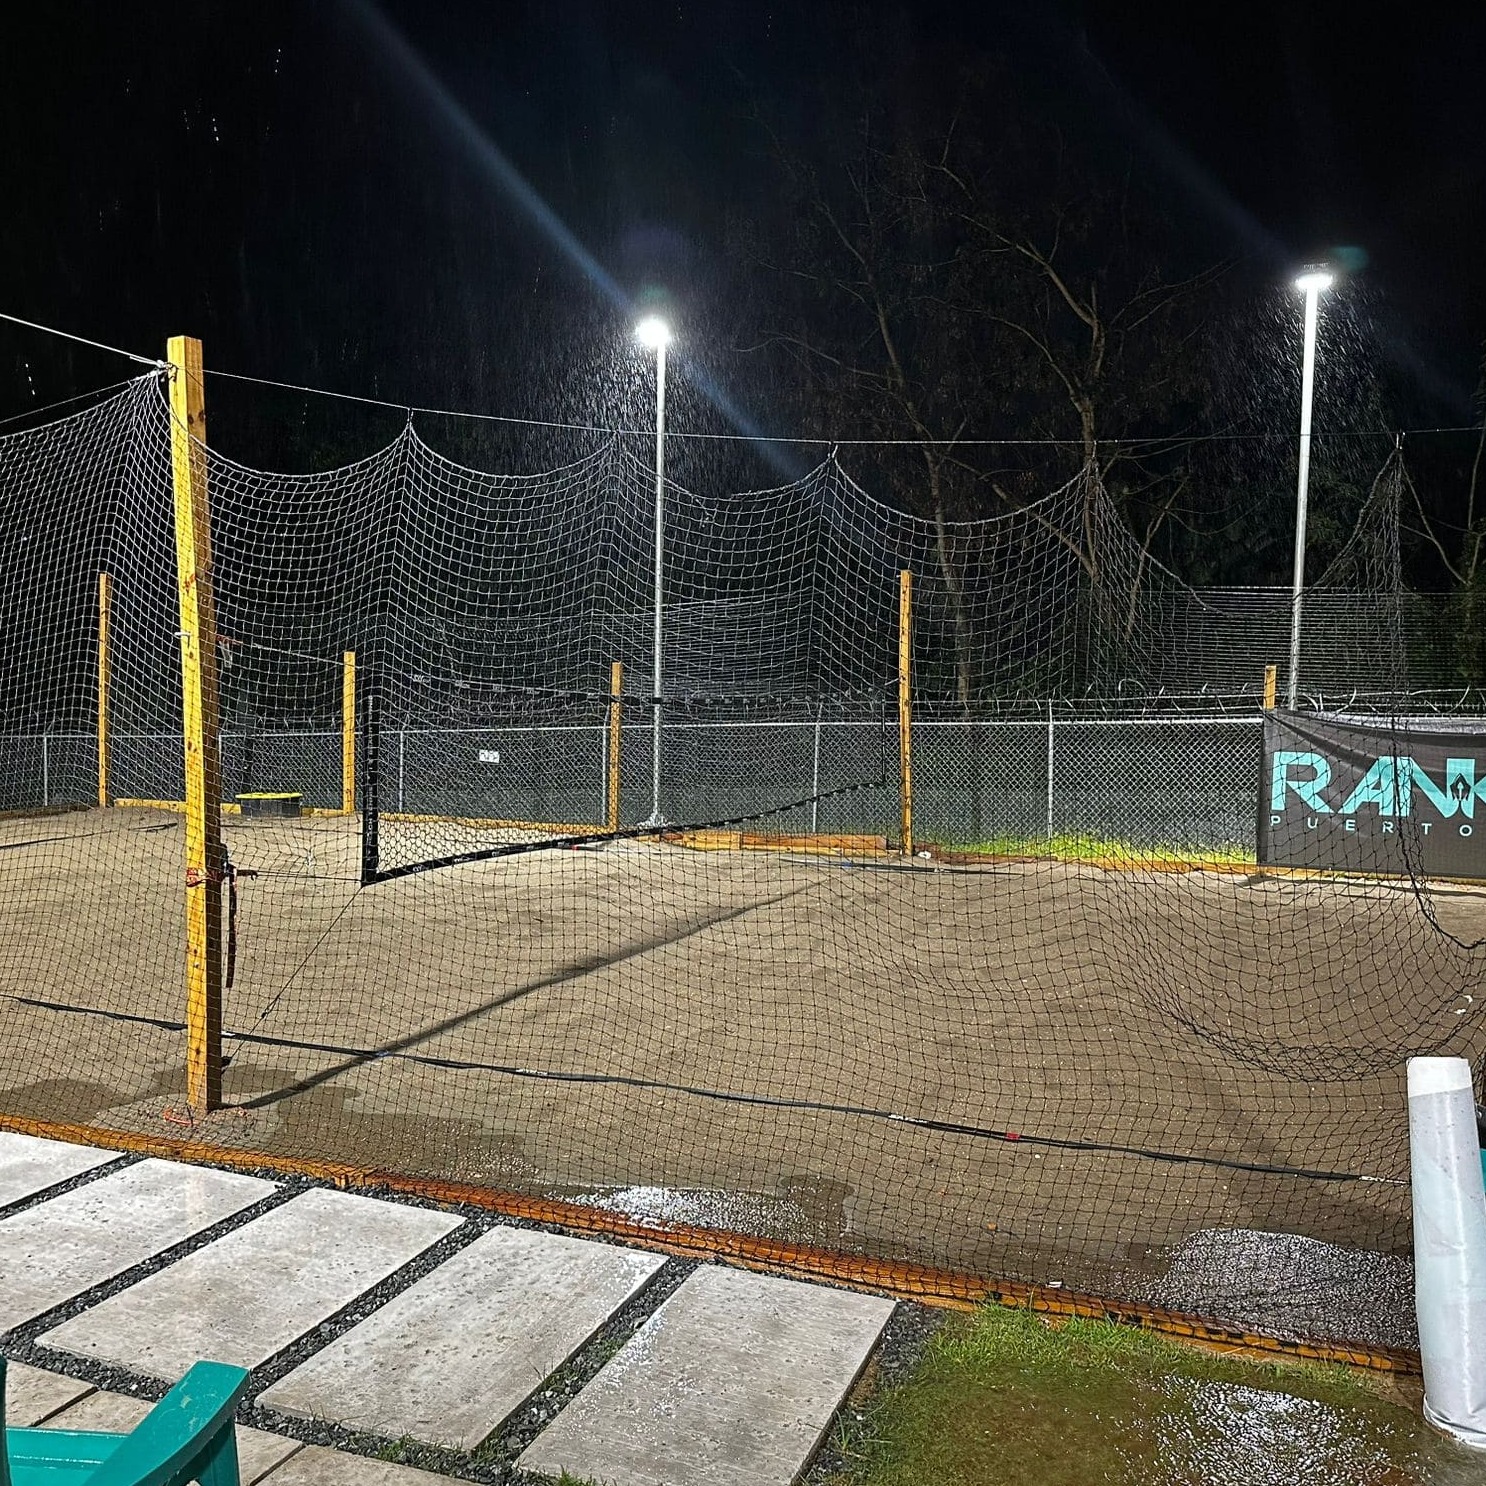 The Difference Between LED Floodlights And Traditional Floodlights